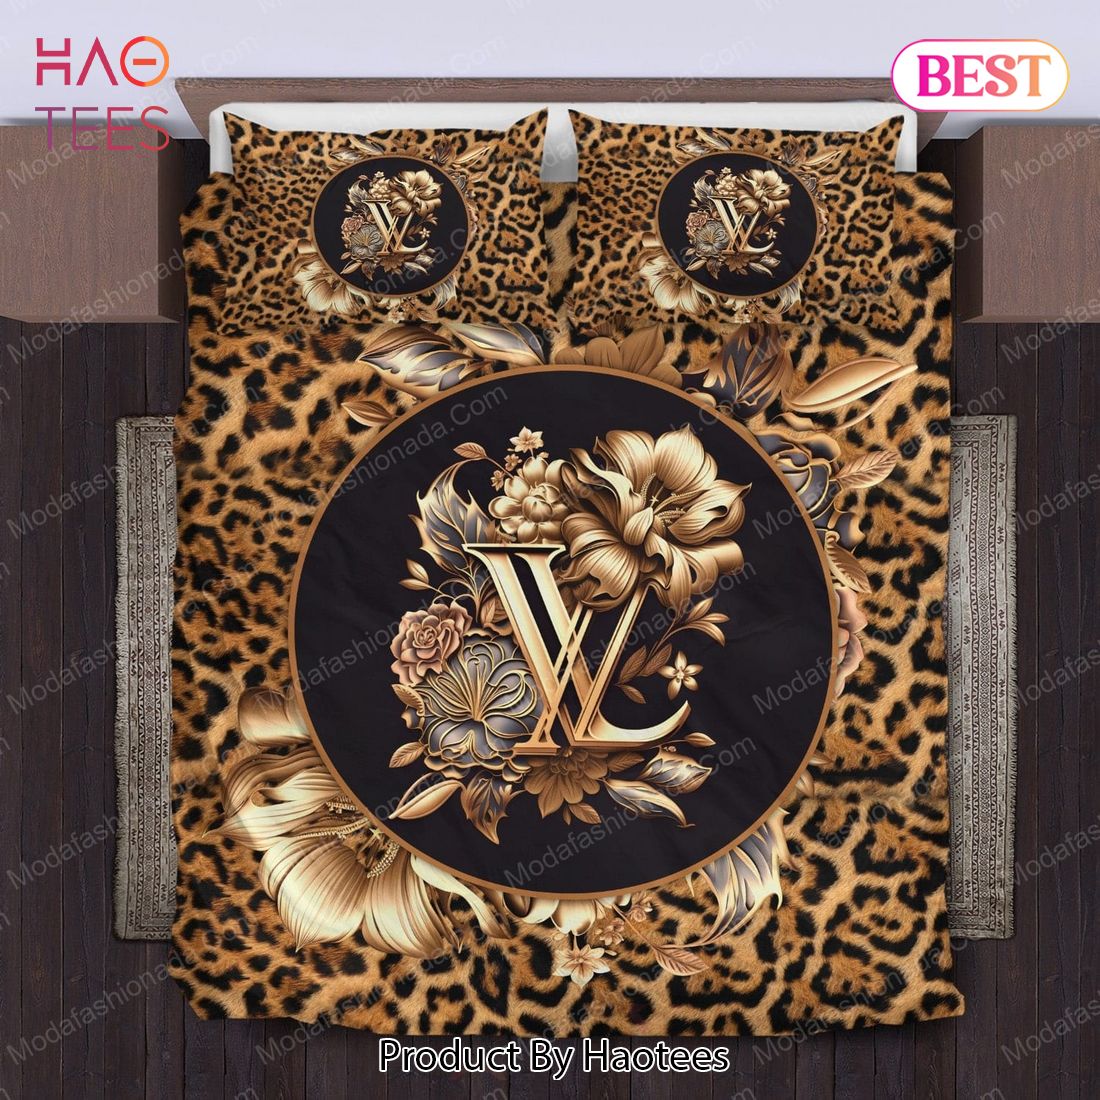 Buy Flowers And Leopard Pattern Louis Vuitton Bedding Sets Bed Sets With  Twin, Full, Queen, King Size